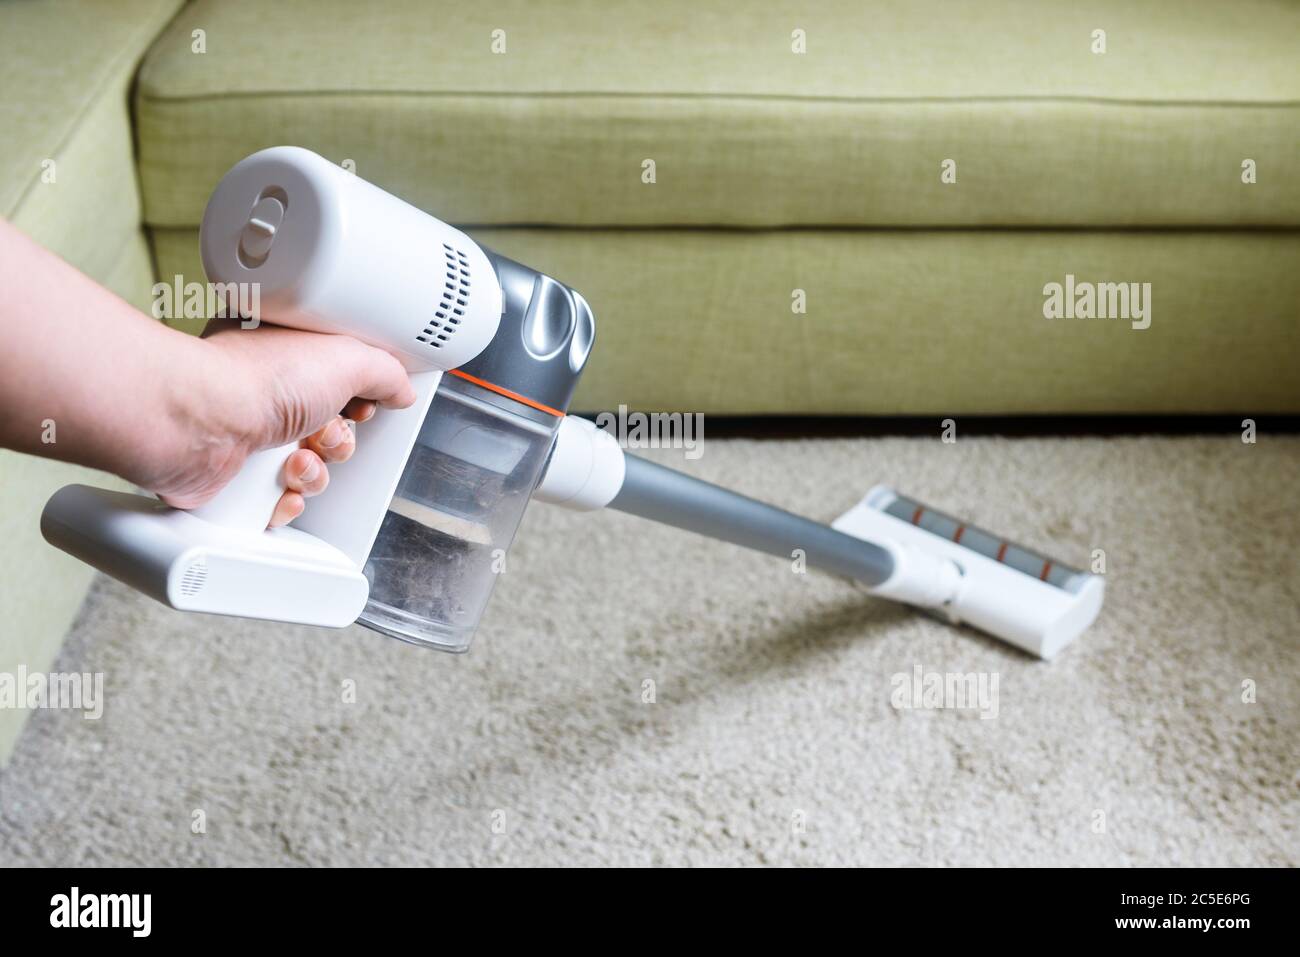 Wireless vacuum cleaner used on carpet in room. Housework with new upright hoover. Person holds modern white vacuum cleaner by sofa. Home cleaning, ca Stock Photo